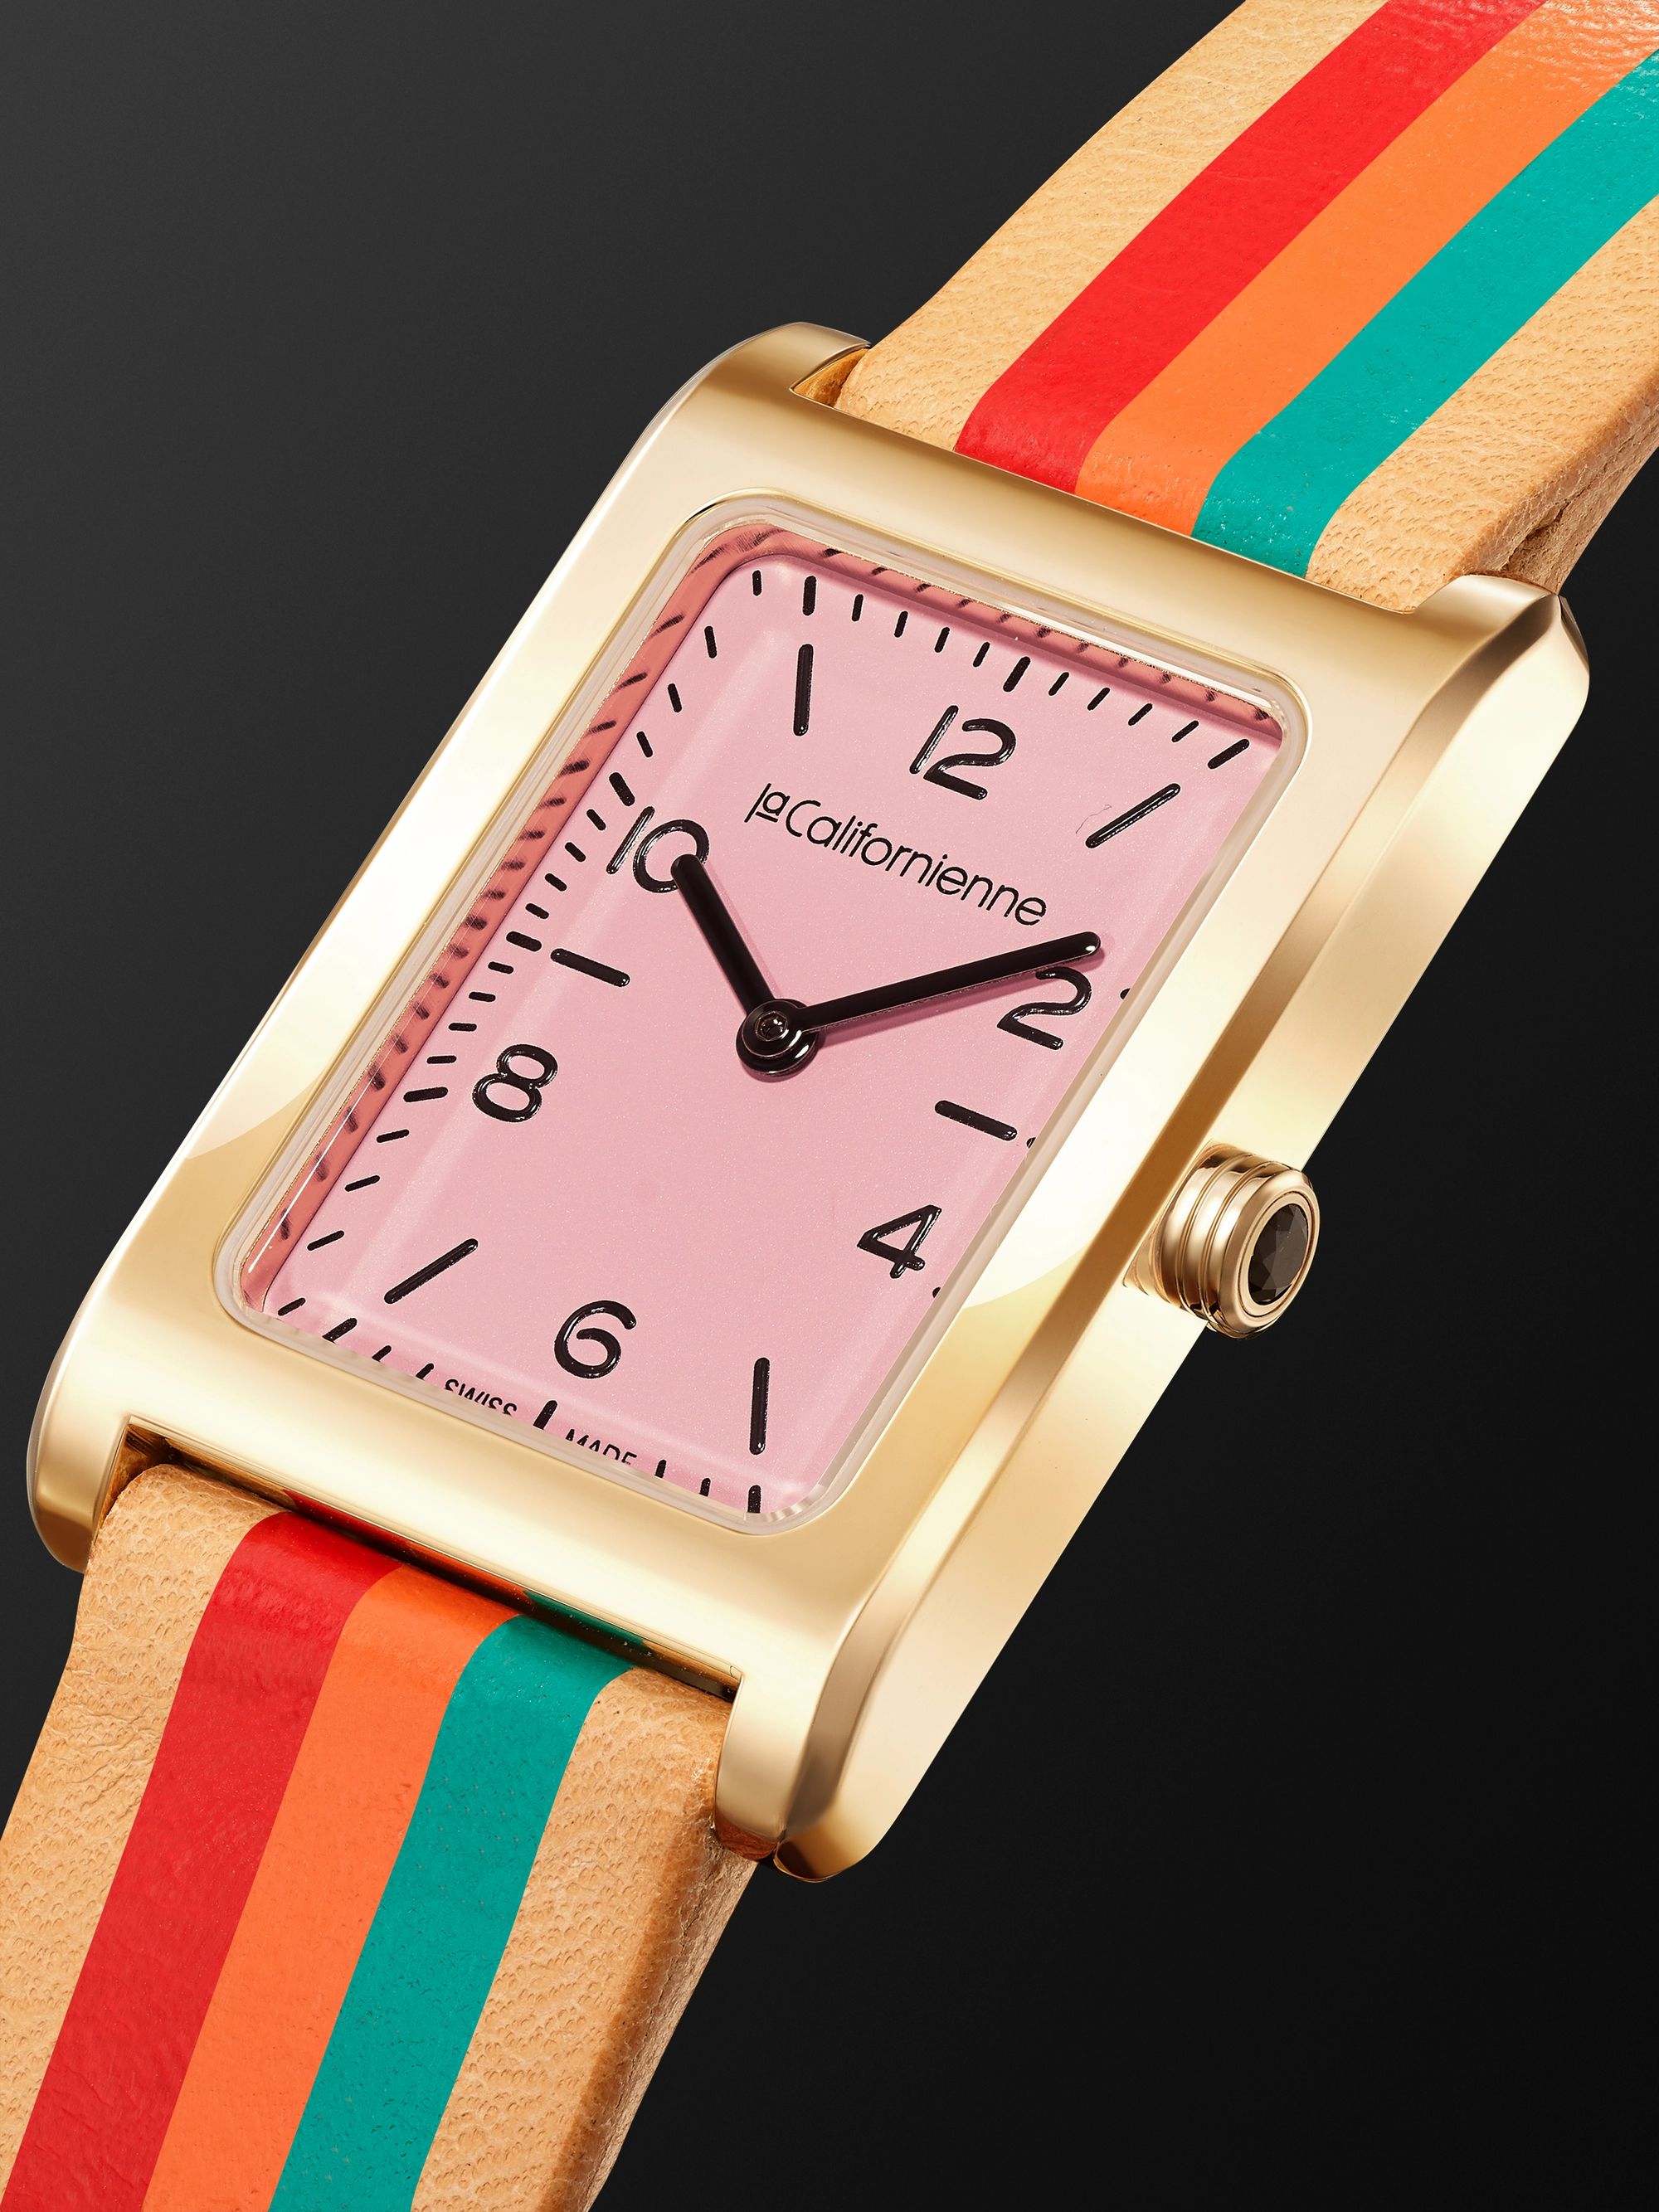 LA CALIFORNIENNE Daybreak 24mm Gold-Plated and Leather Watch, Ref. No. DB-09 YG TERR